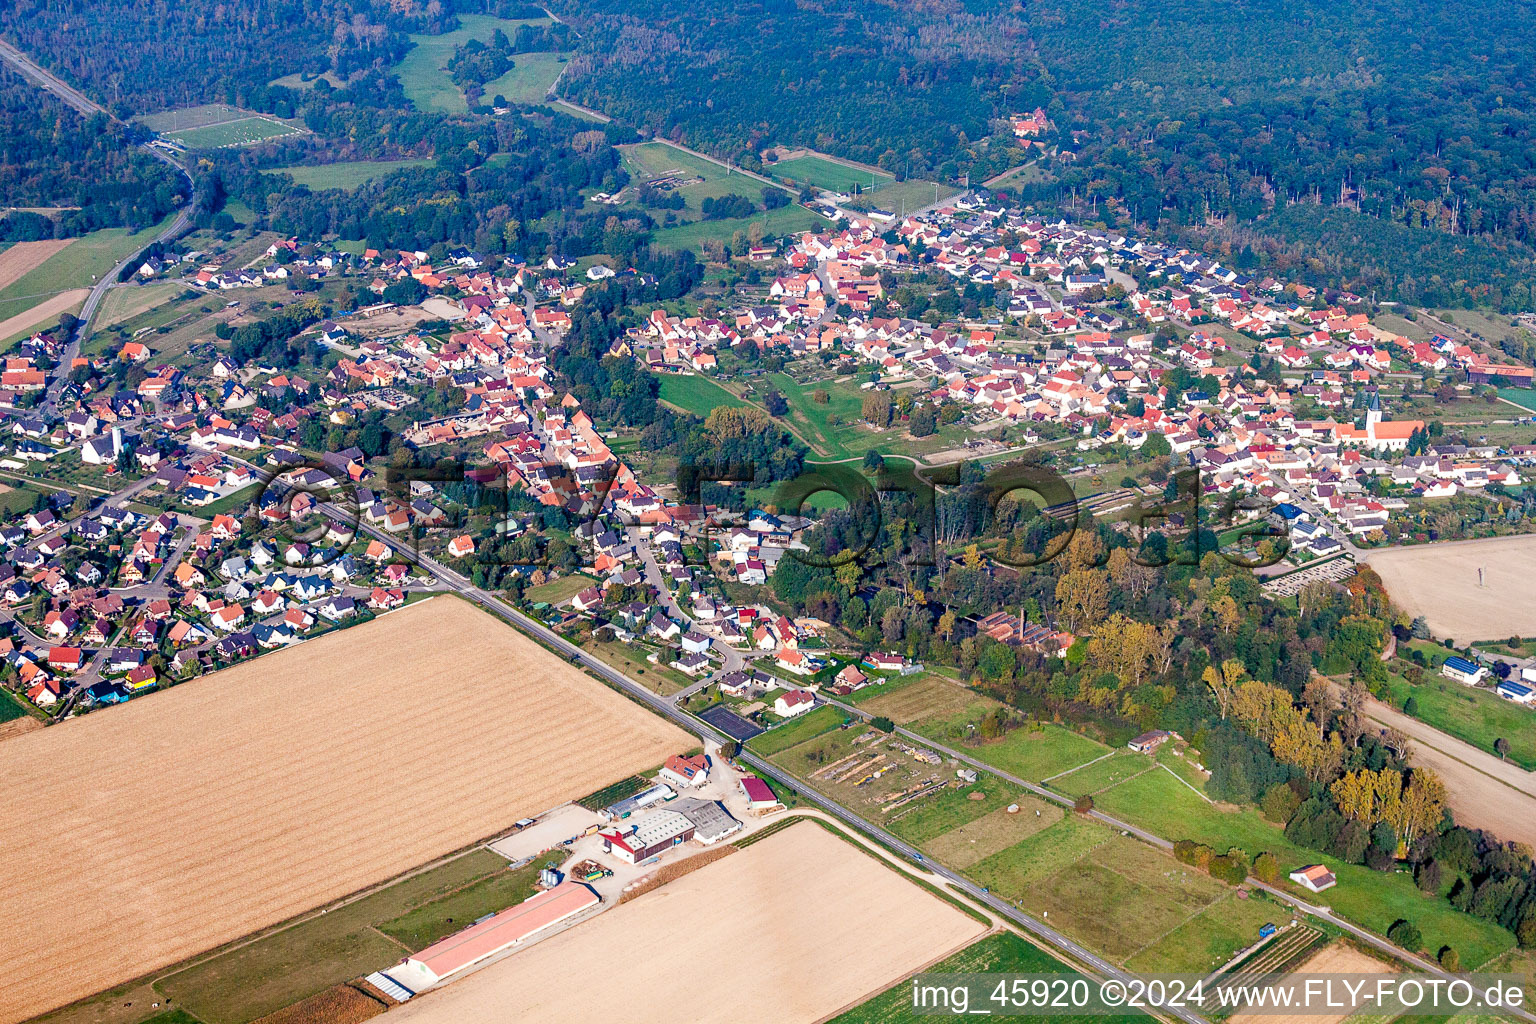 Village - view on the edge of agricultural fields and farmland in Scheibenhard in Grand Est, France